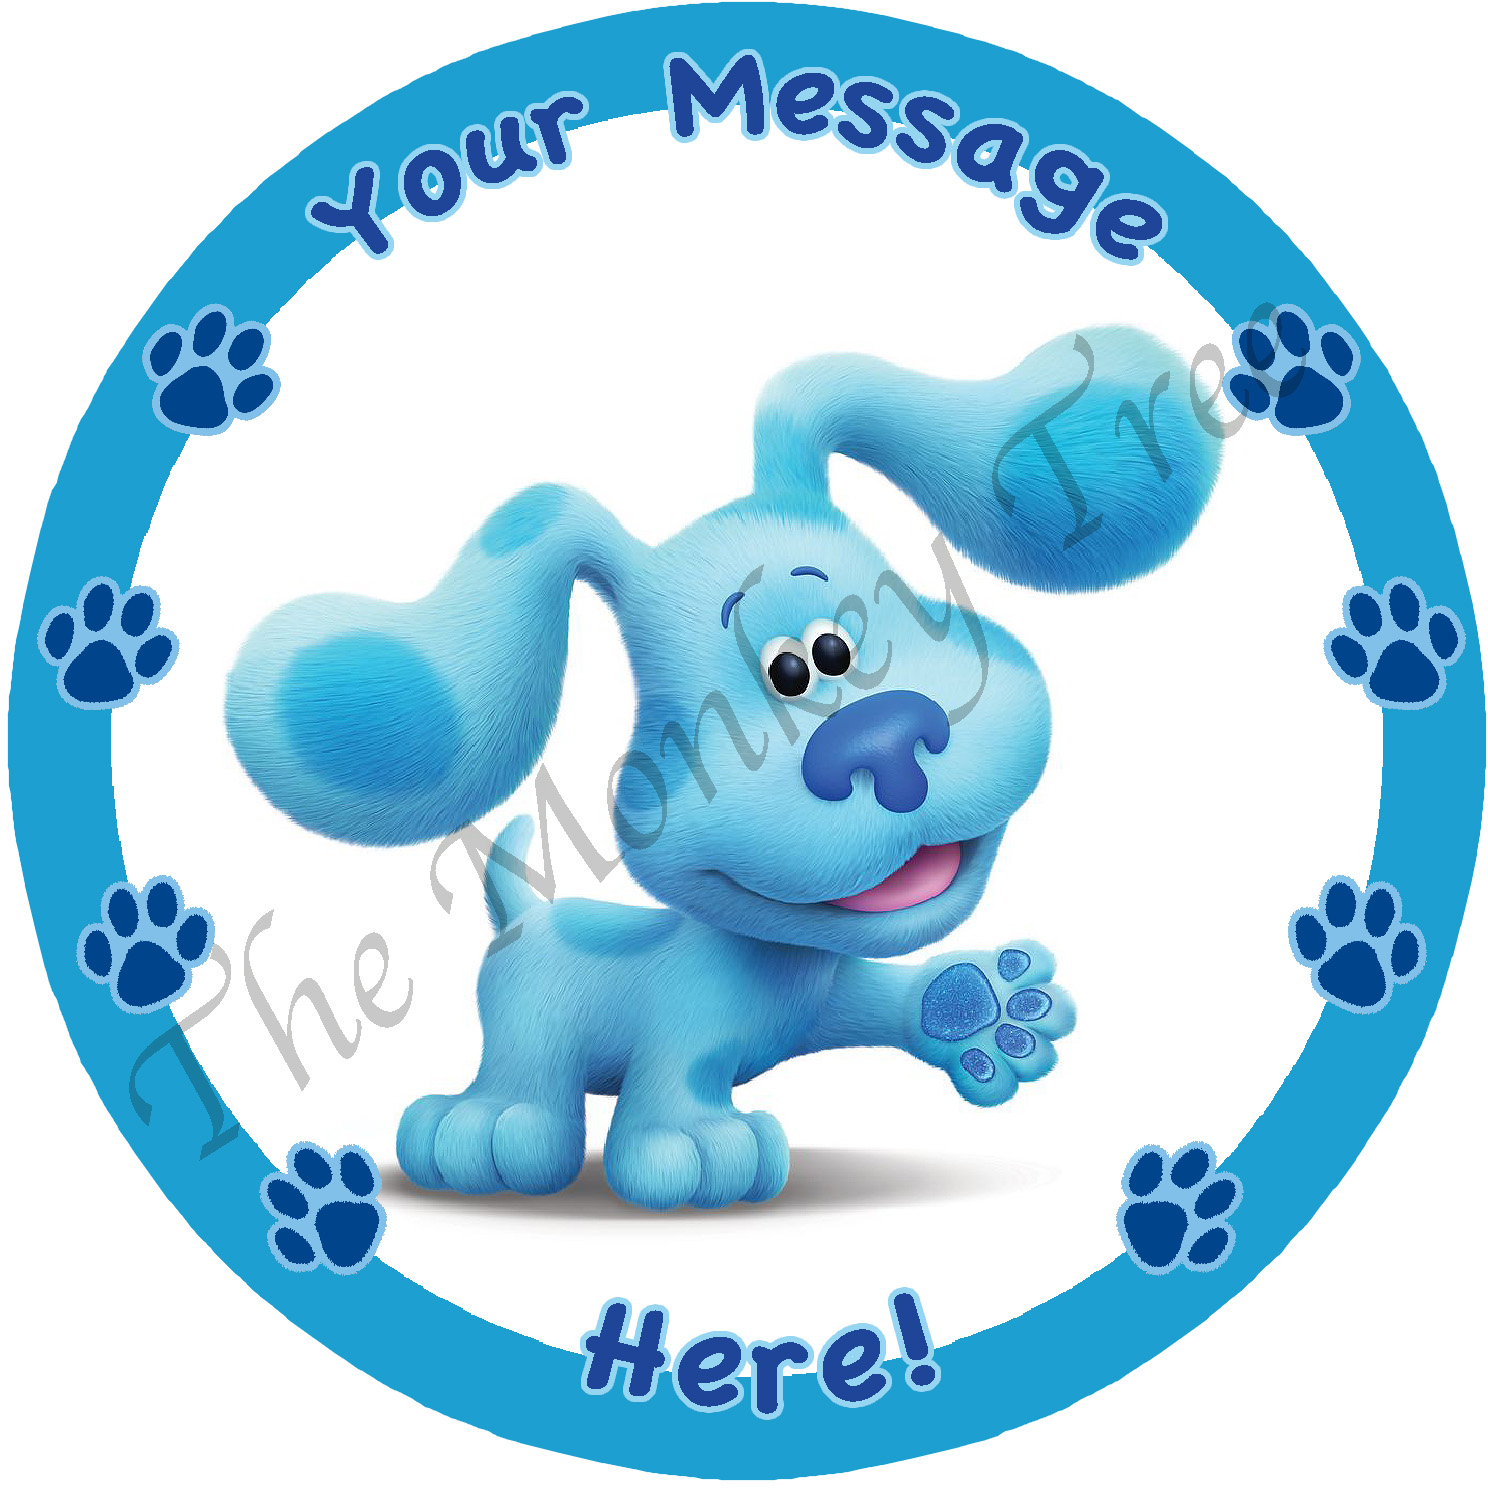 BLUES CLUES Party Edible Cake topper image